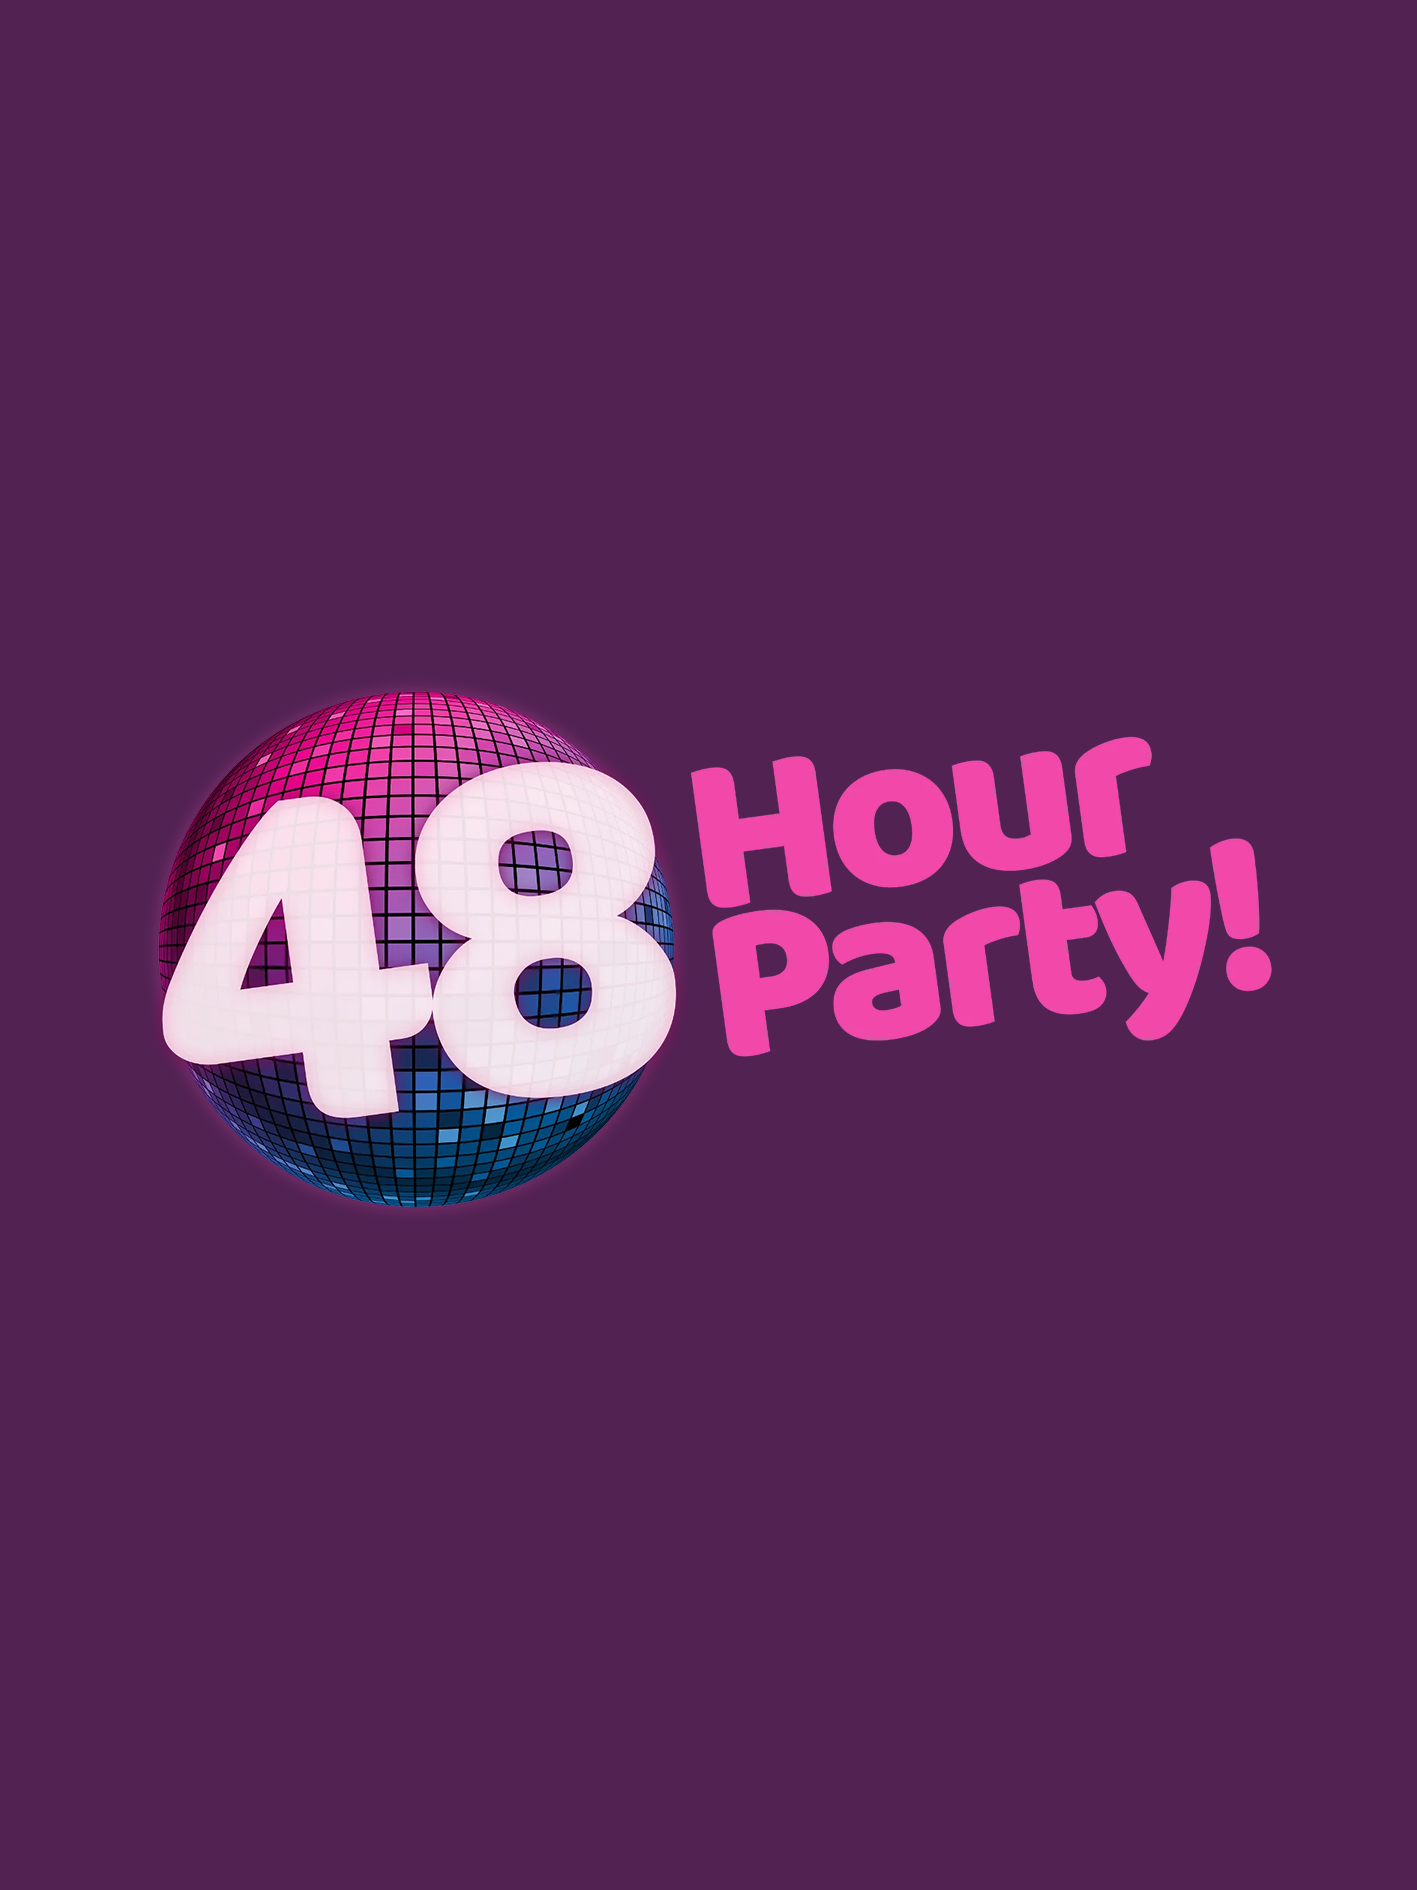 48 Hour Party!